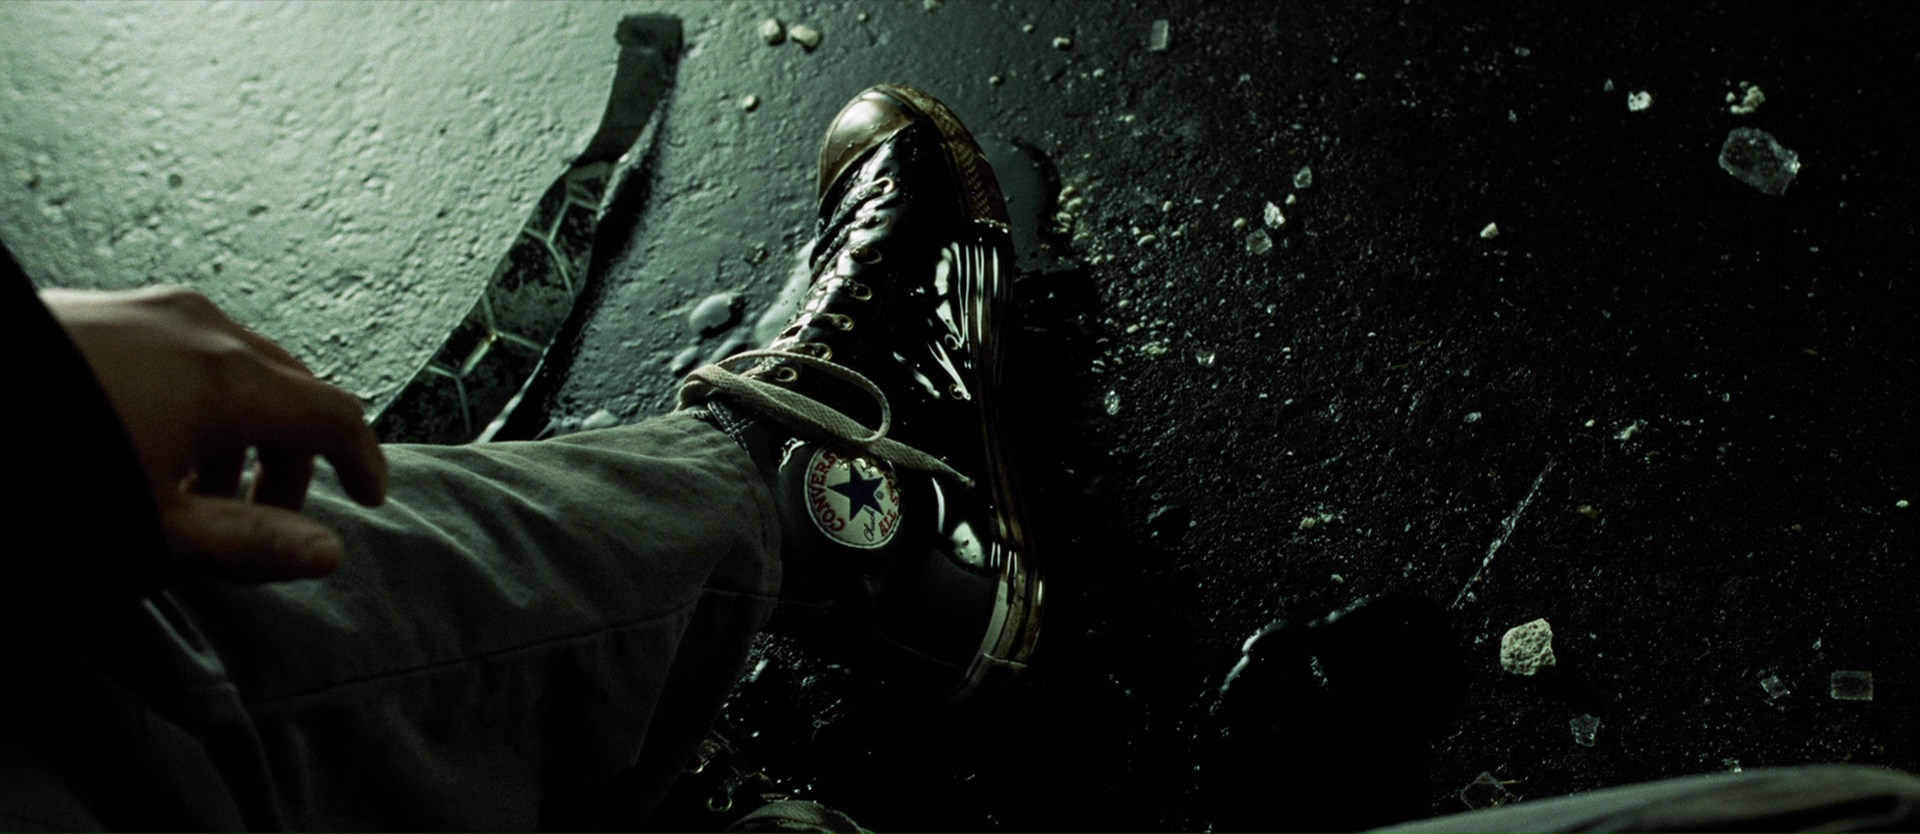 tro på bekendtskab Kemiker Converse Sneakers Worn By Will Smith In I, Robot (2004)